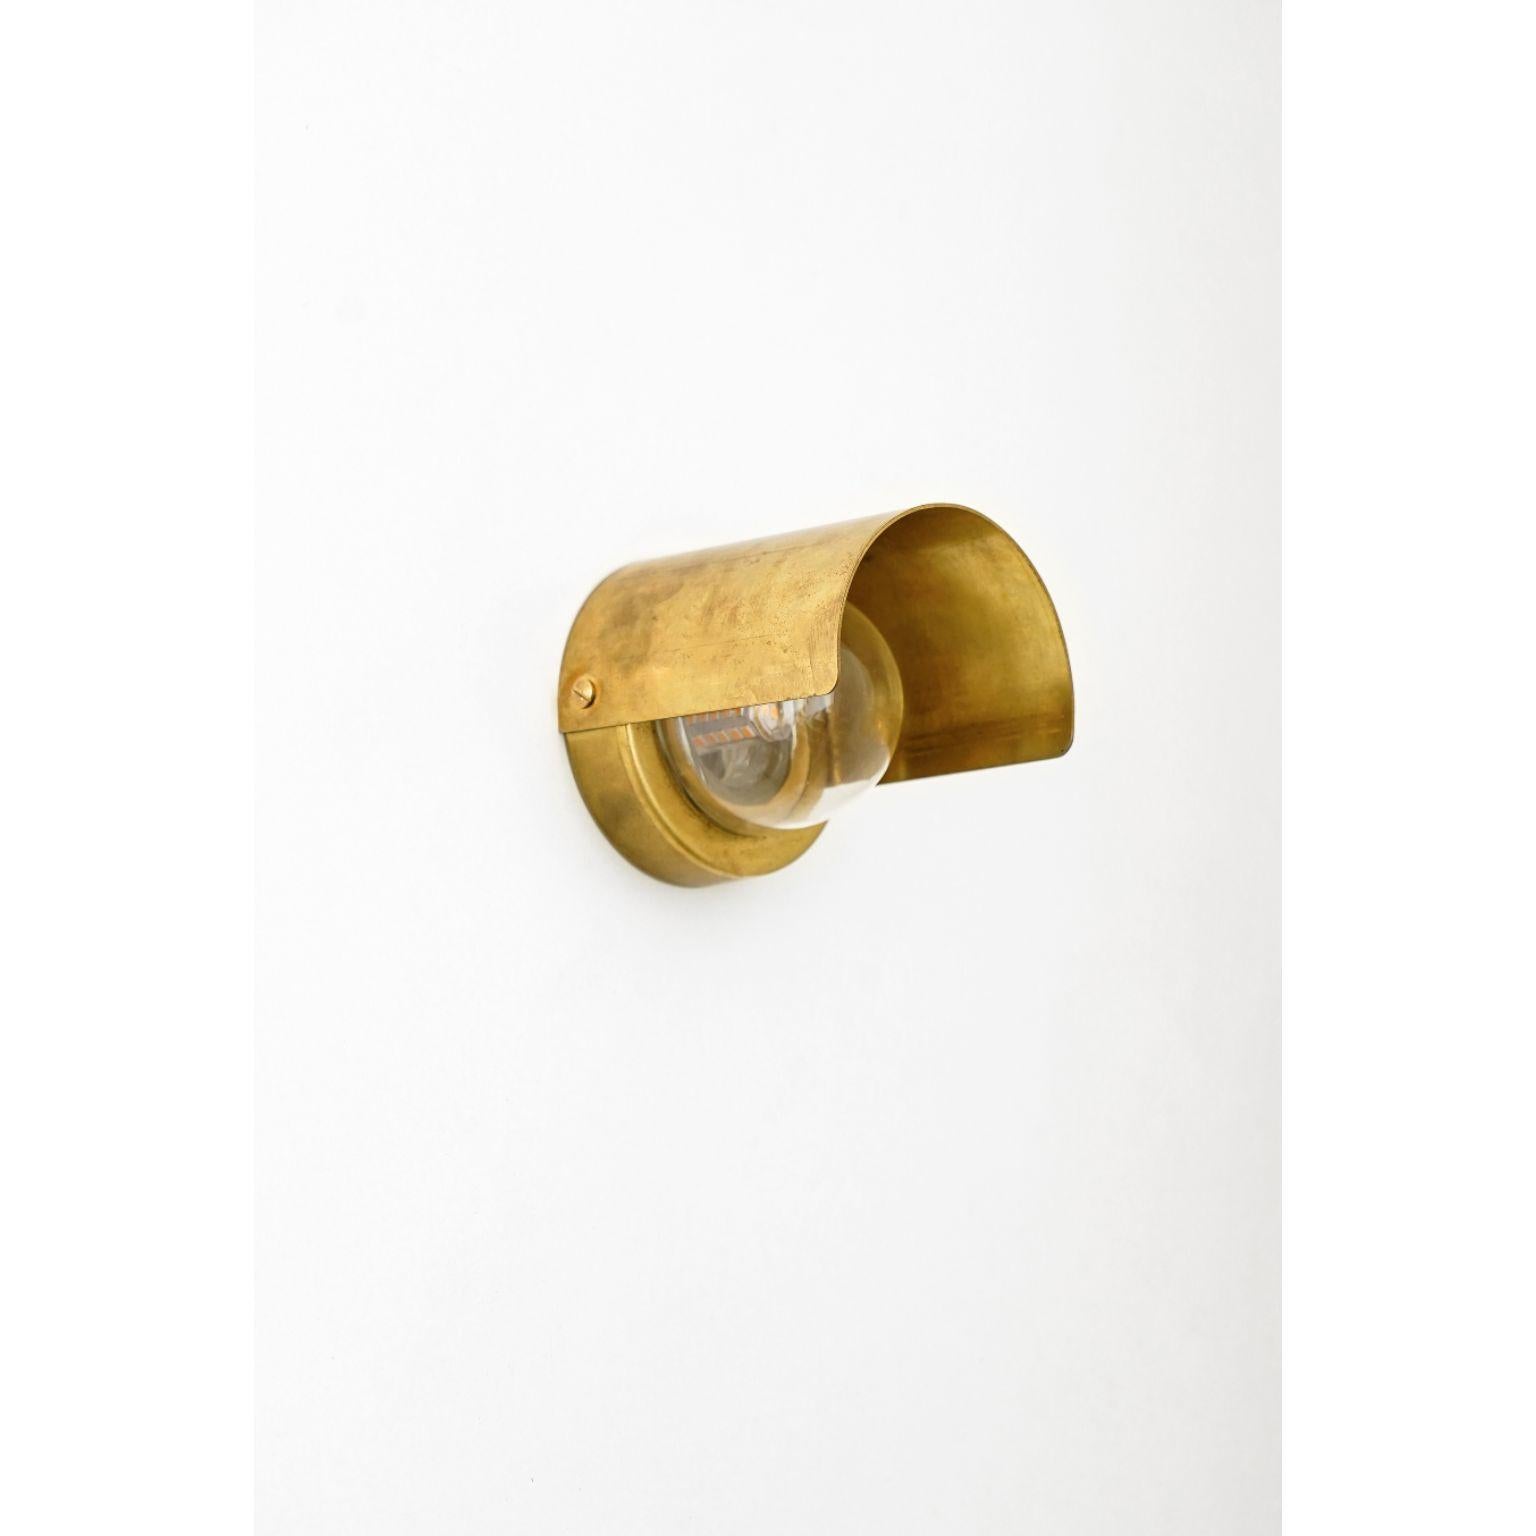 Alba Monocle wall light by Contain
Dimensions: D 8 x W 8 x H 10 cm 
Materials: Brass, 3D printed PLA structure and optical lens.
Available in different finishes, Universal box required for installation / indoor and outdoor.

All our lamps can be